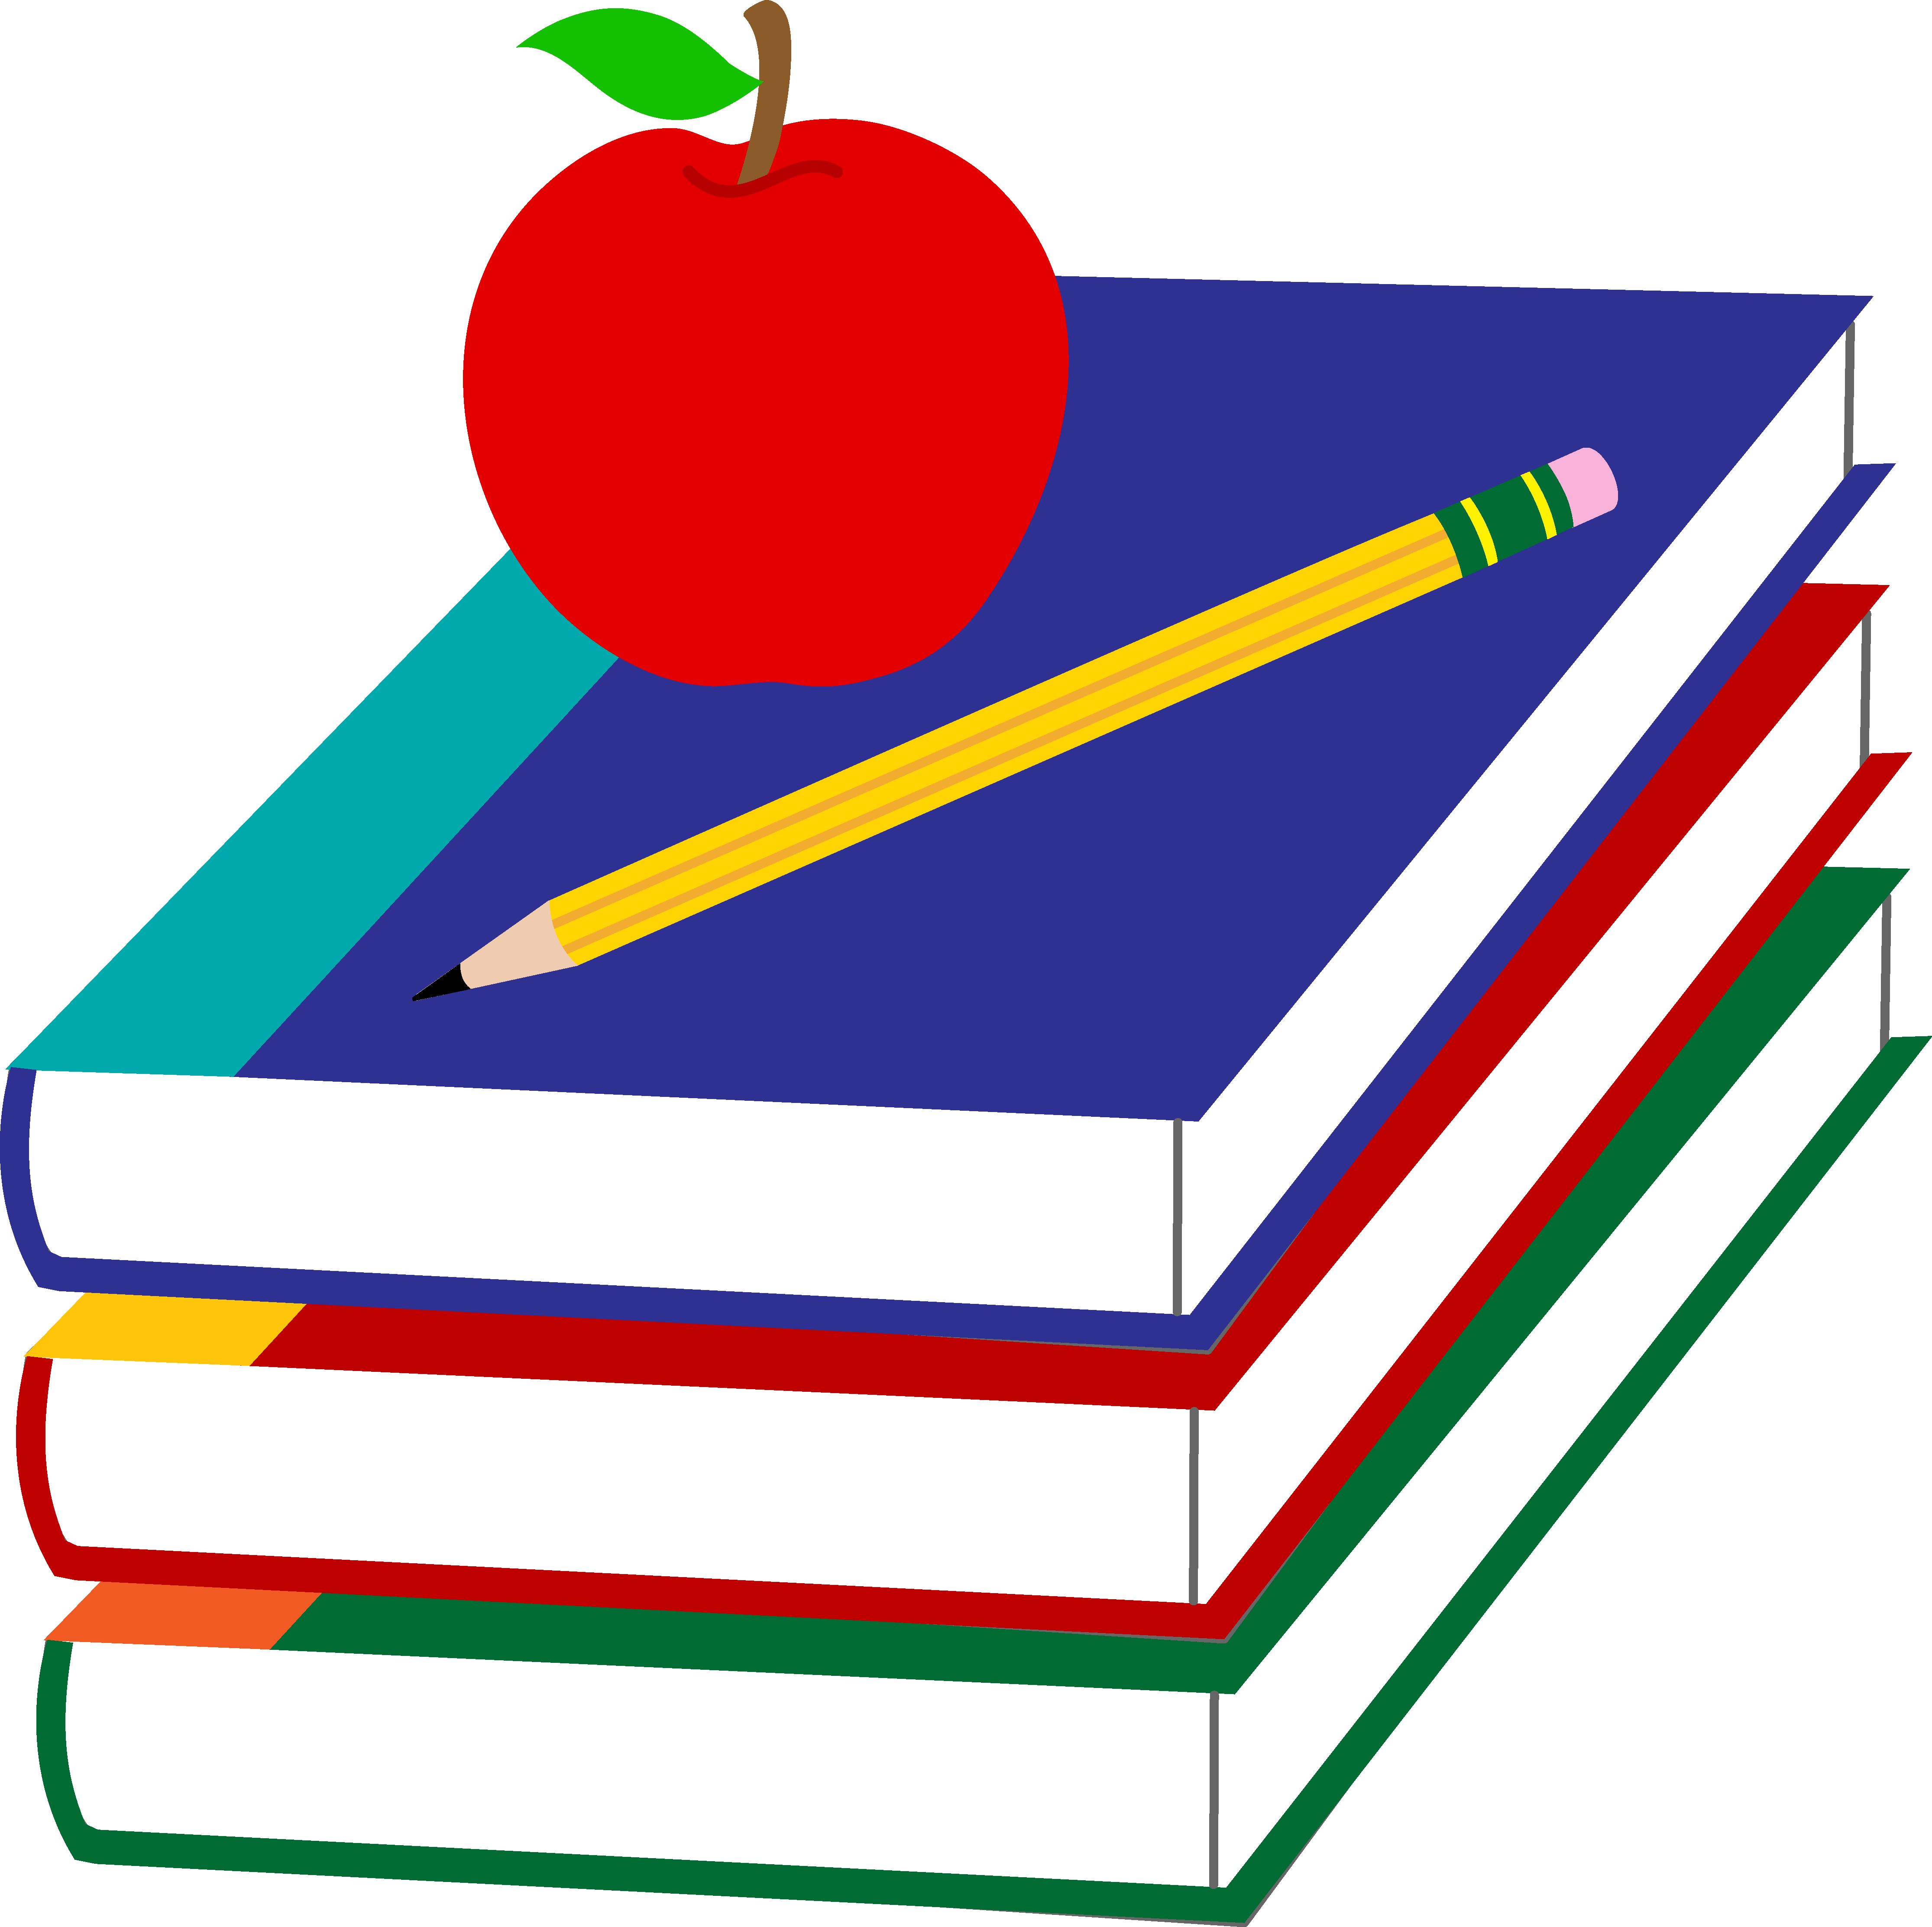 School books with school supplies clipart clipartfest 2